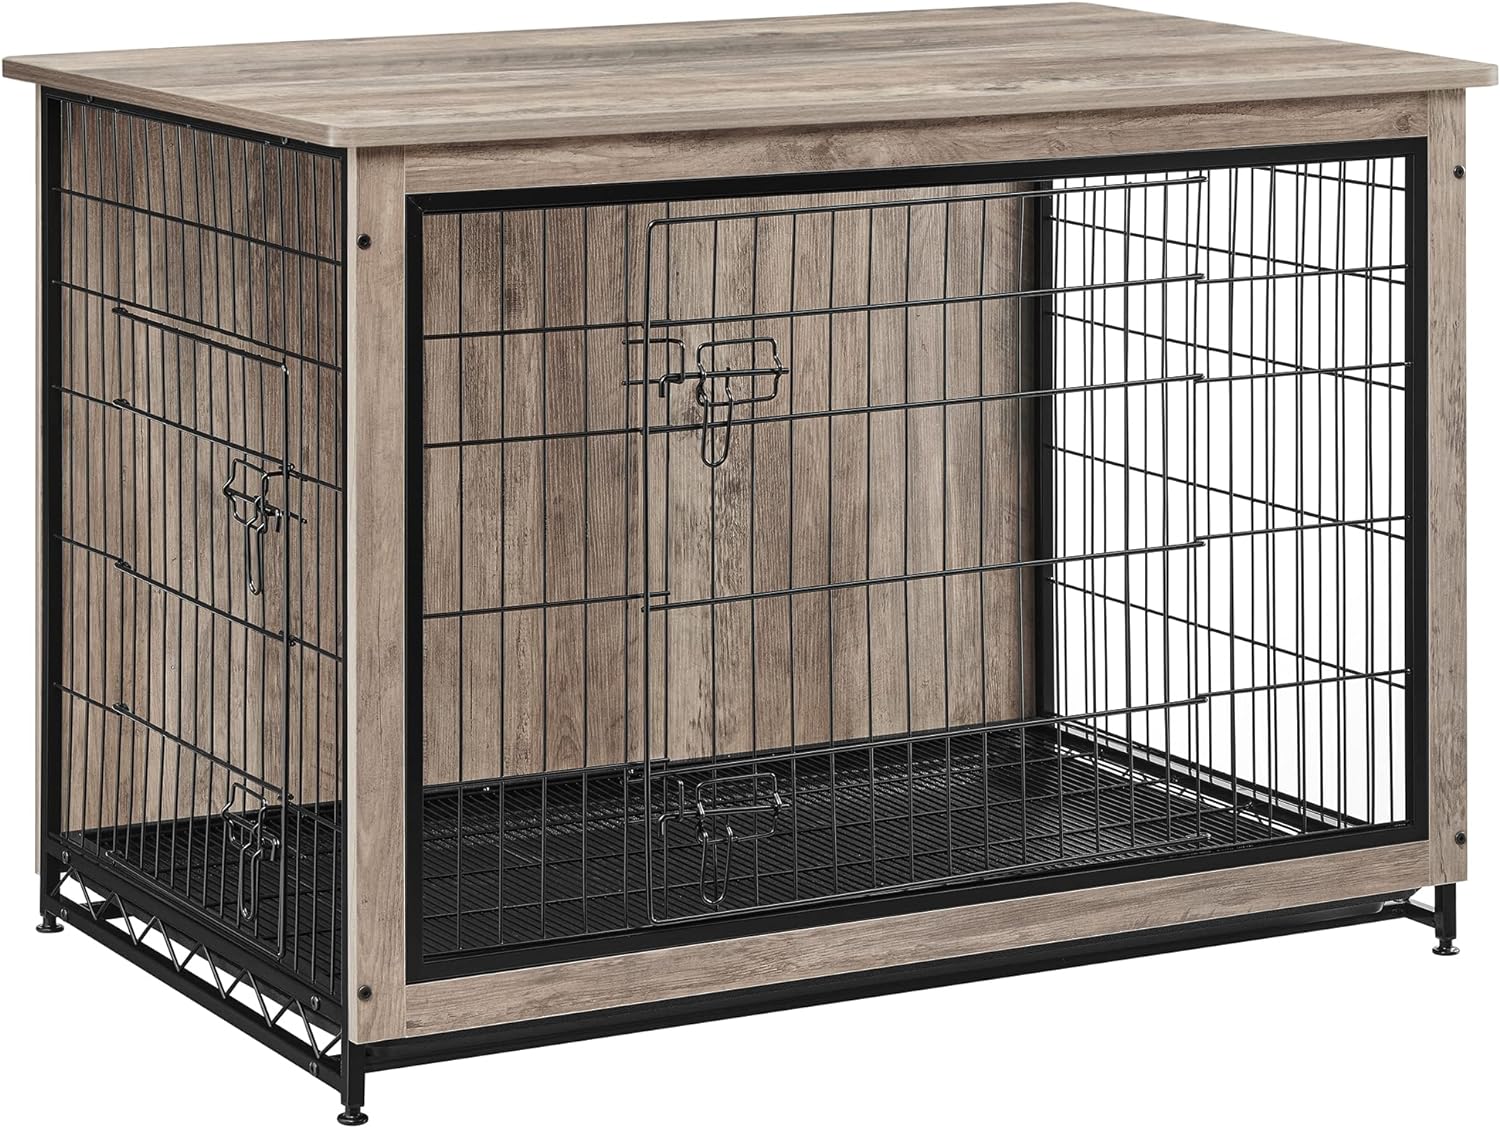 Feandrea Dog Crate Furniture, Side End Table up to 80 lb - $130